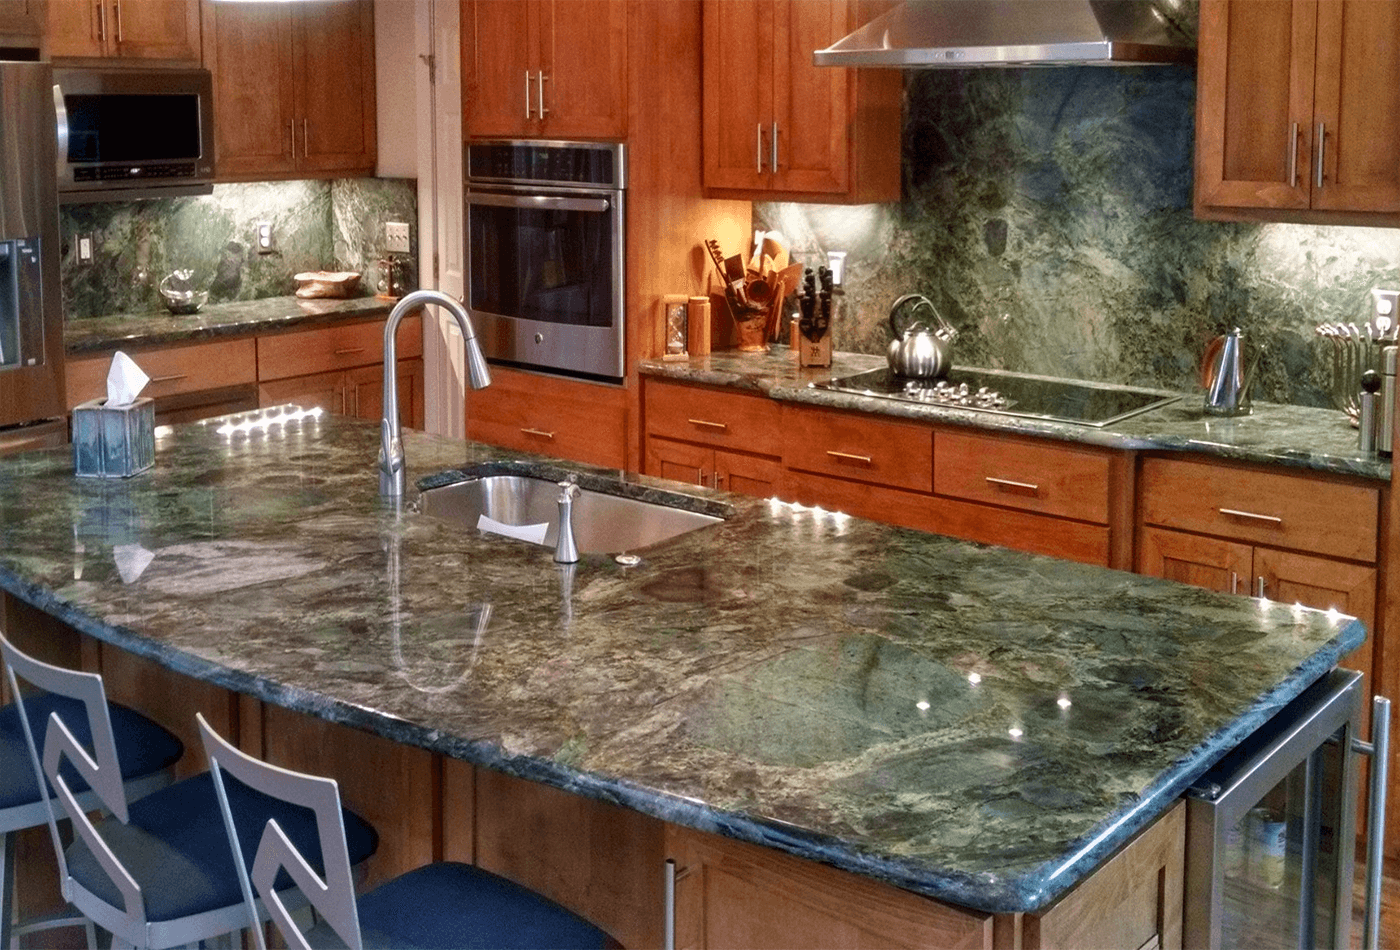 Greenish Granite Bring Out The Nature